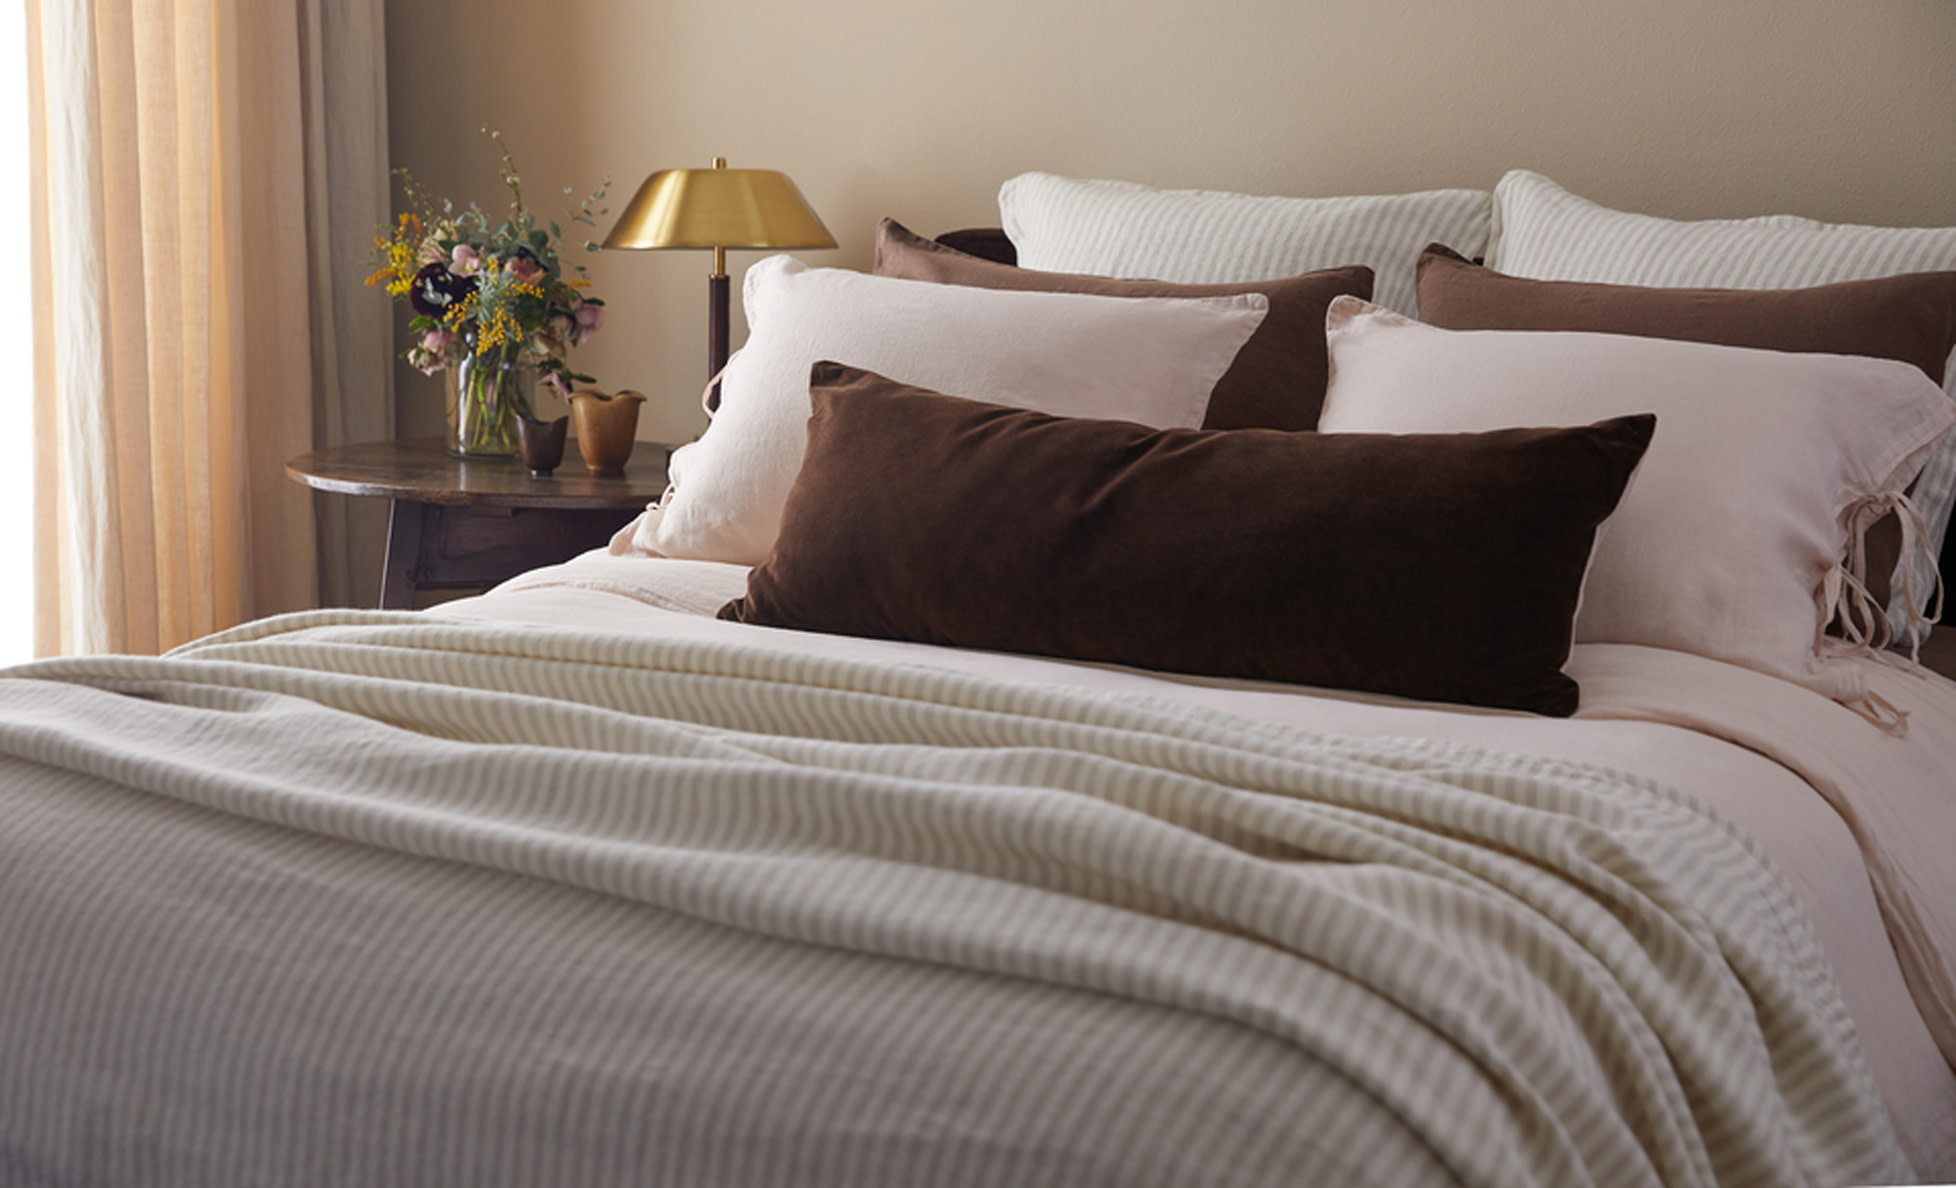 Close up image of a made bed with white sheets and a brown velvet pillow.